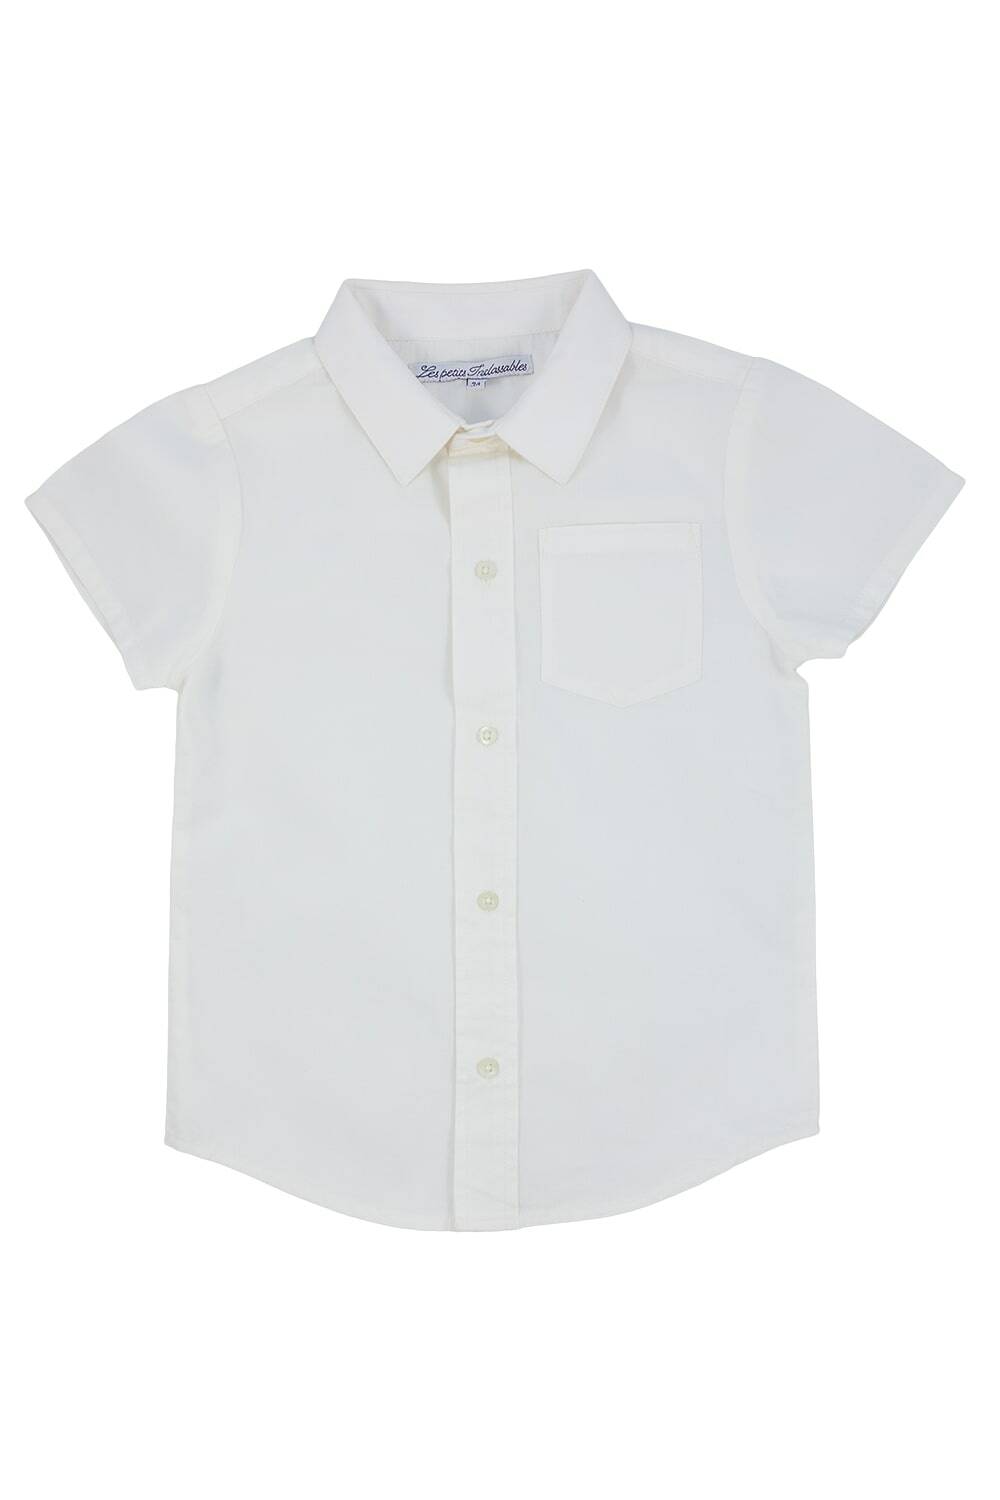 BeeBoo|BeeBoo Les petits Inclassables Chemise Marius ivoire